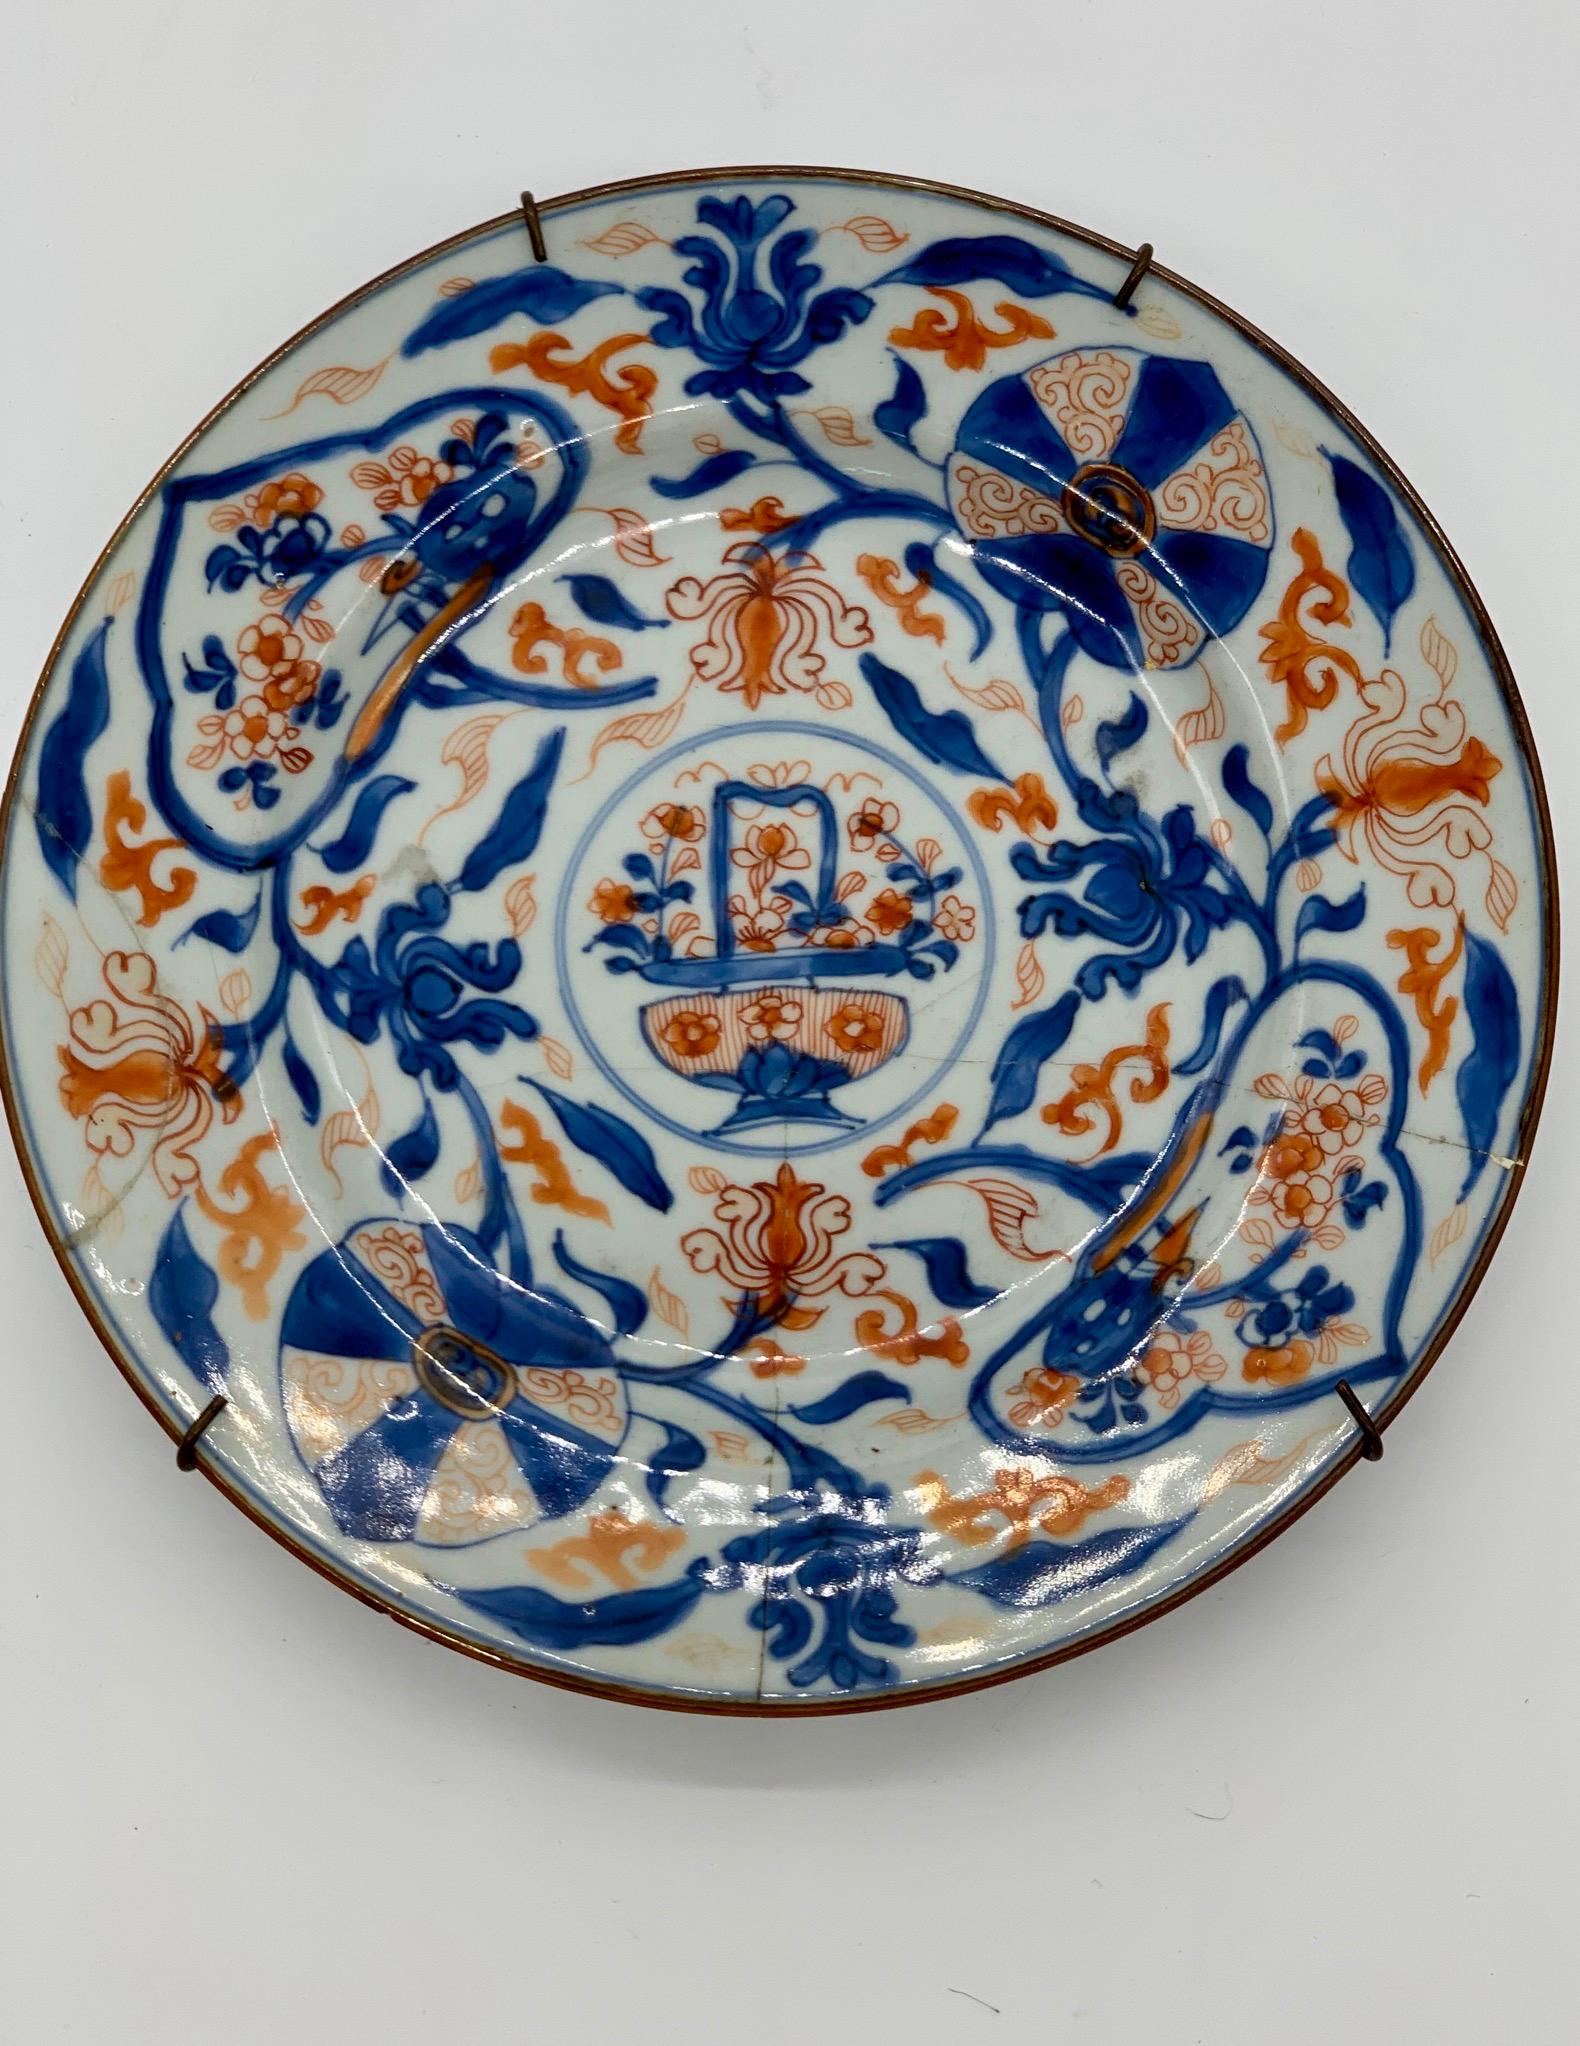 This Chinese decorative plate shows mango leaves and flowers in blue and orange color. It has been previously fixed as can be seen in images.